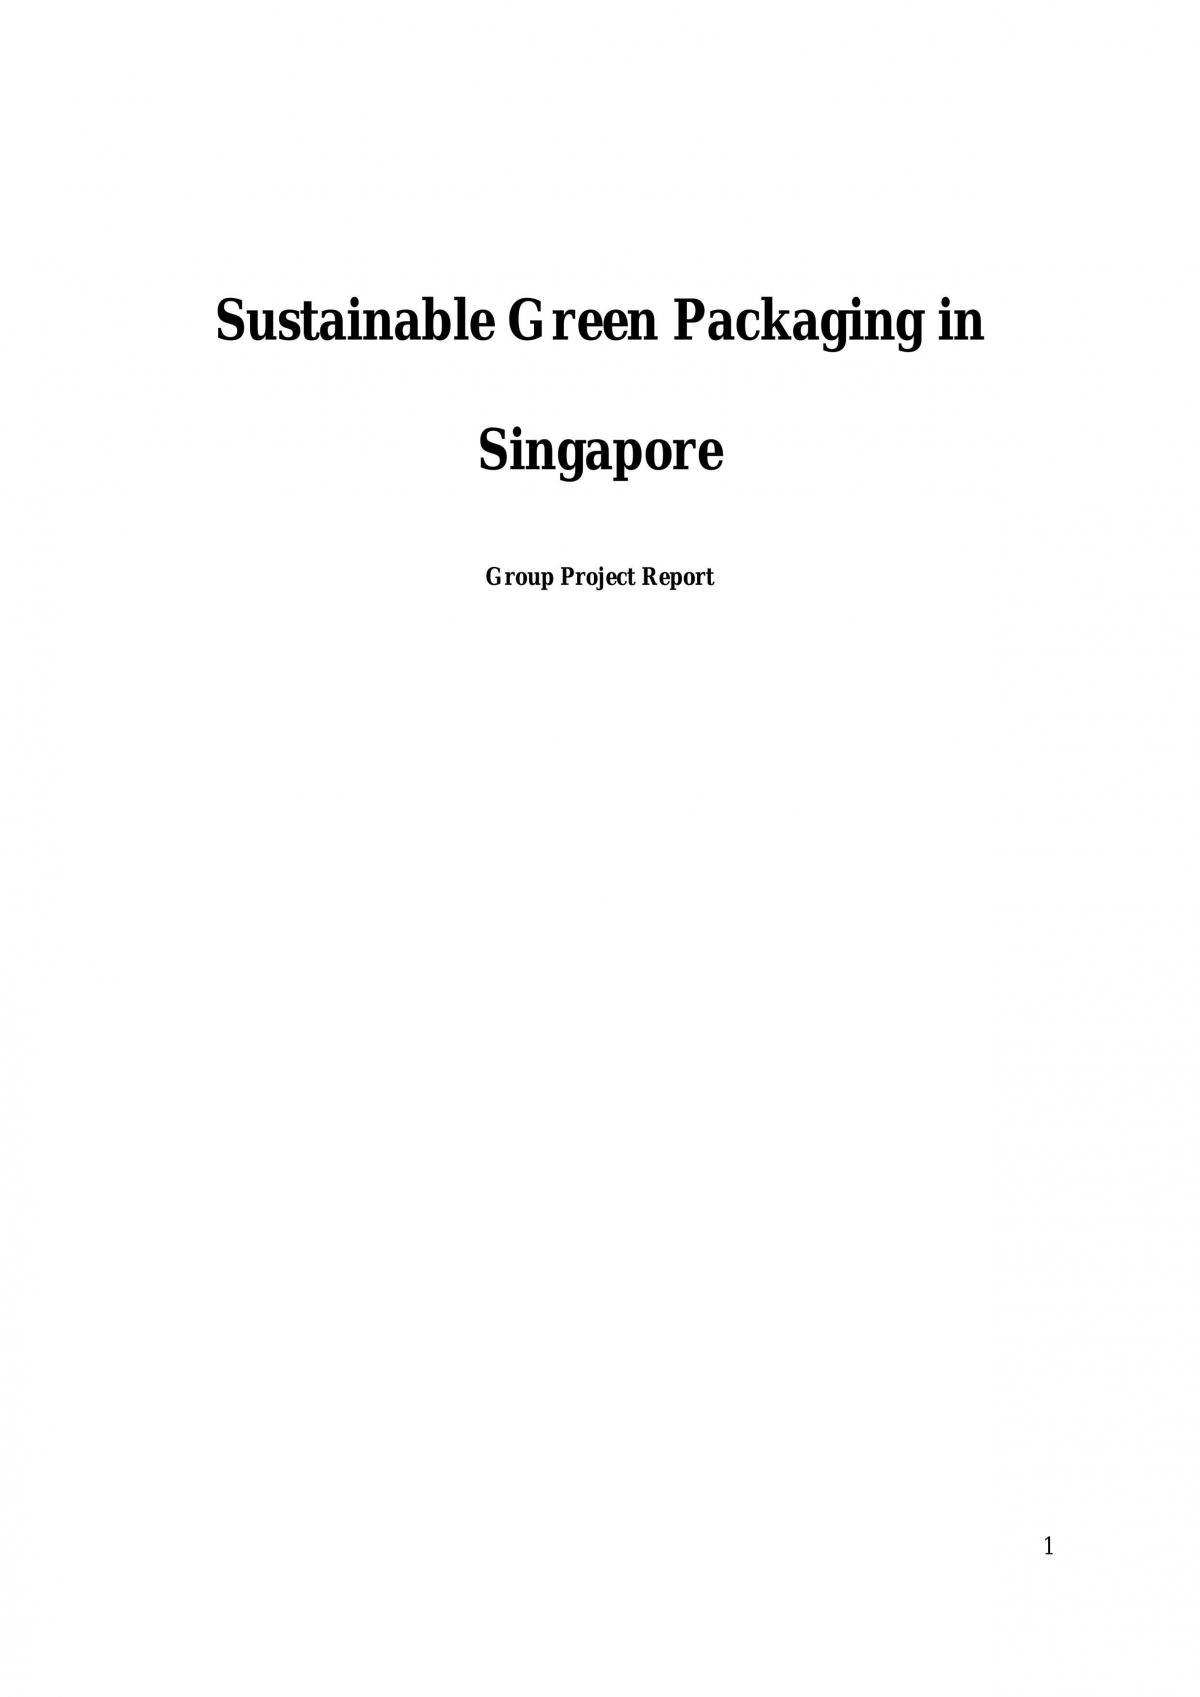 Report on Sustainable Green Packaging in Singapore - Page 1